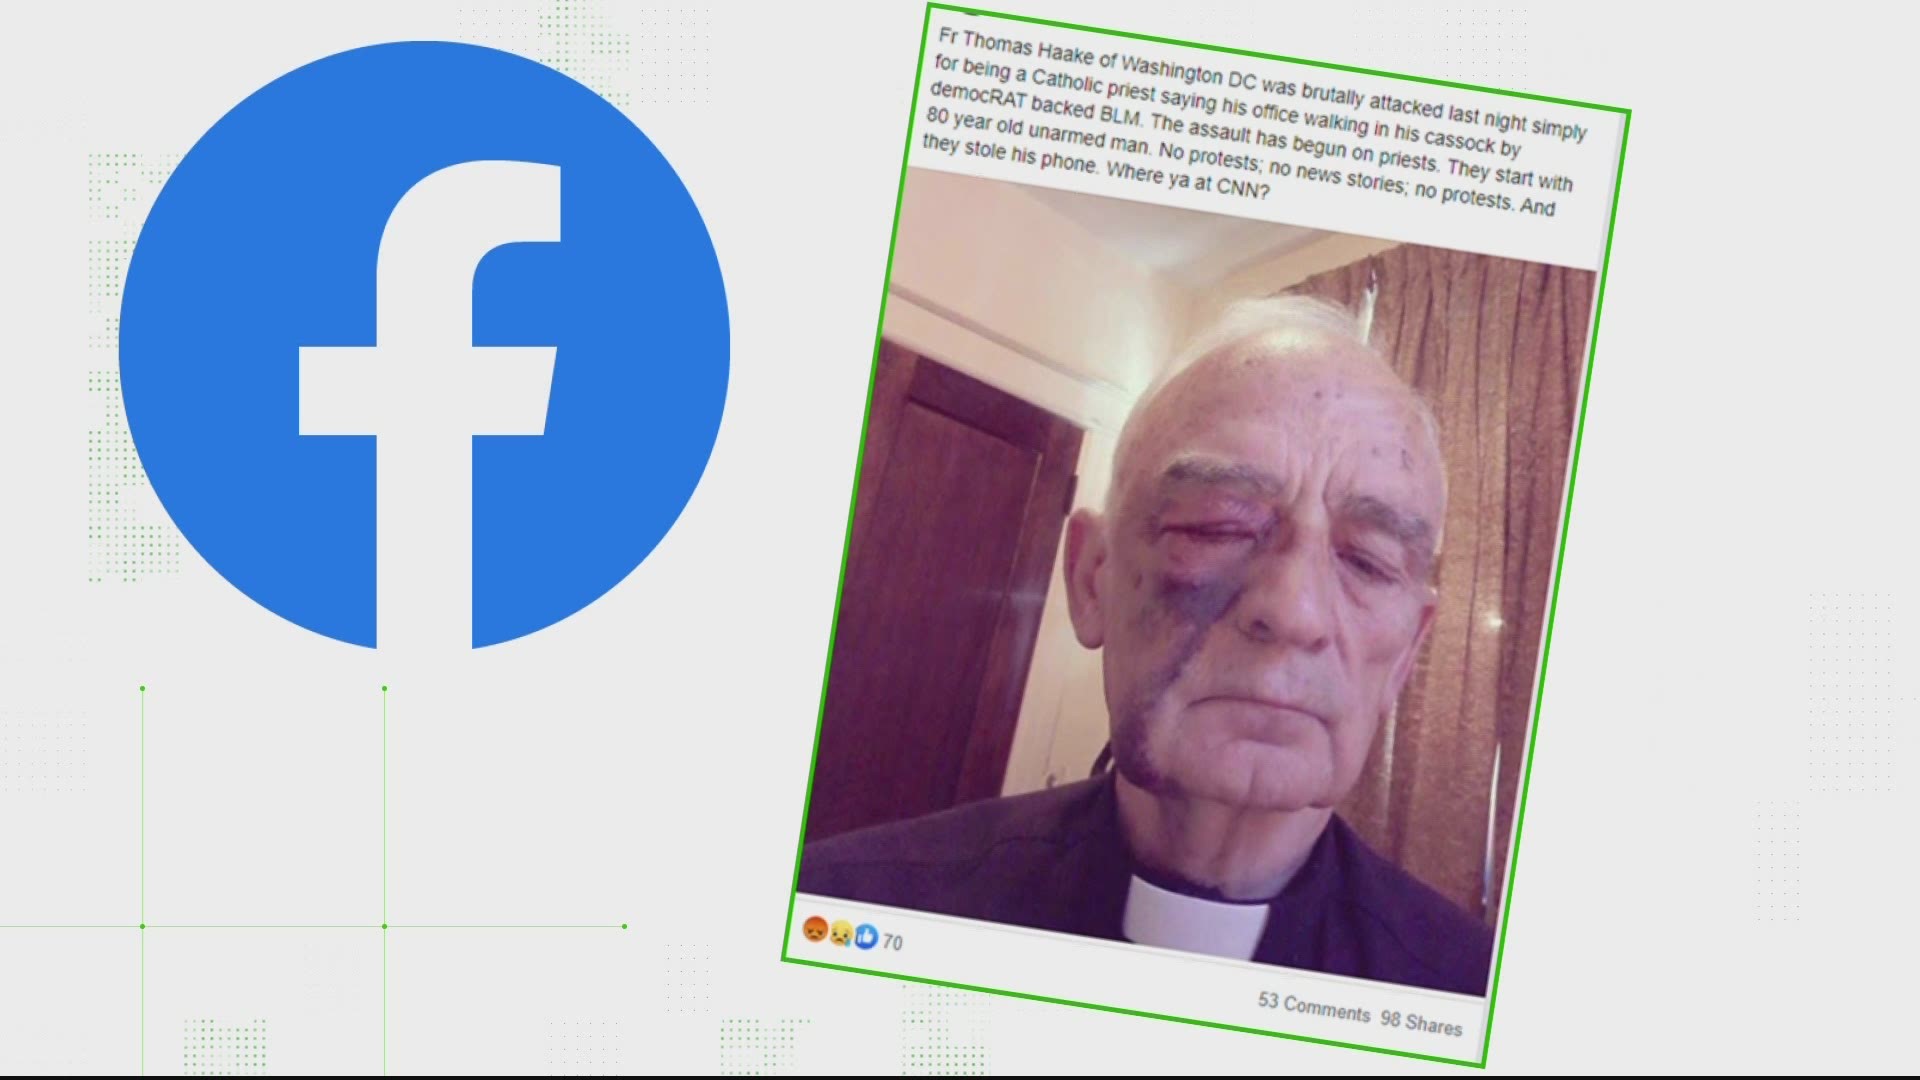 A photo of a man with a swollen right eye, identified by the Archdioceses of Washington as Father Thomas Haake, went viral. Here's what we've verified.